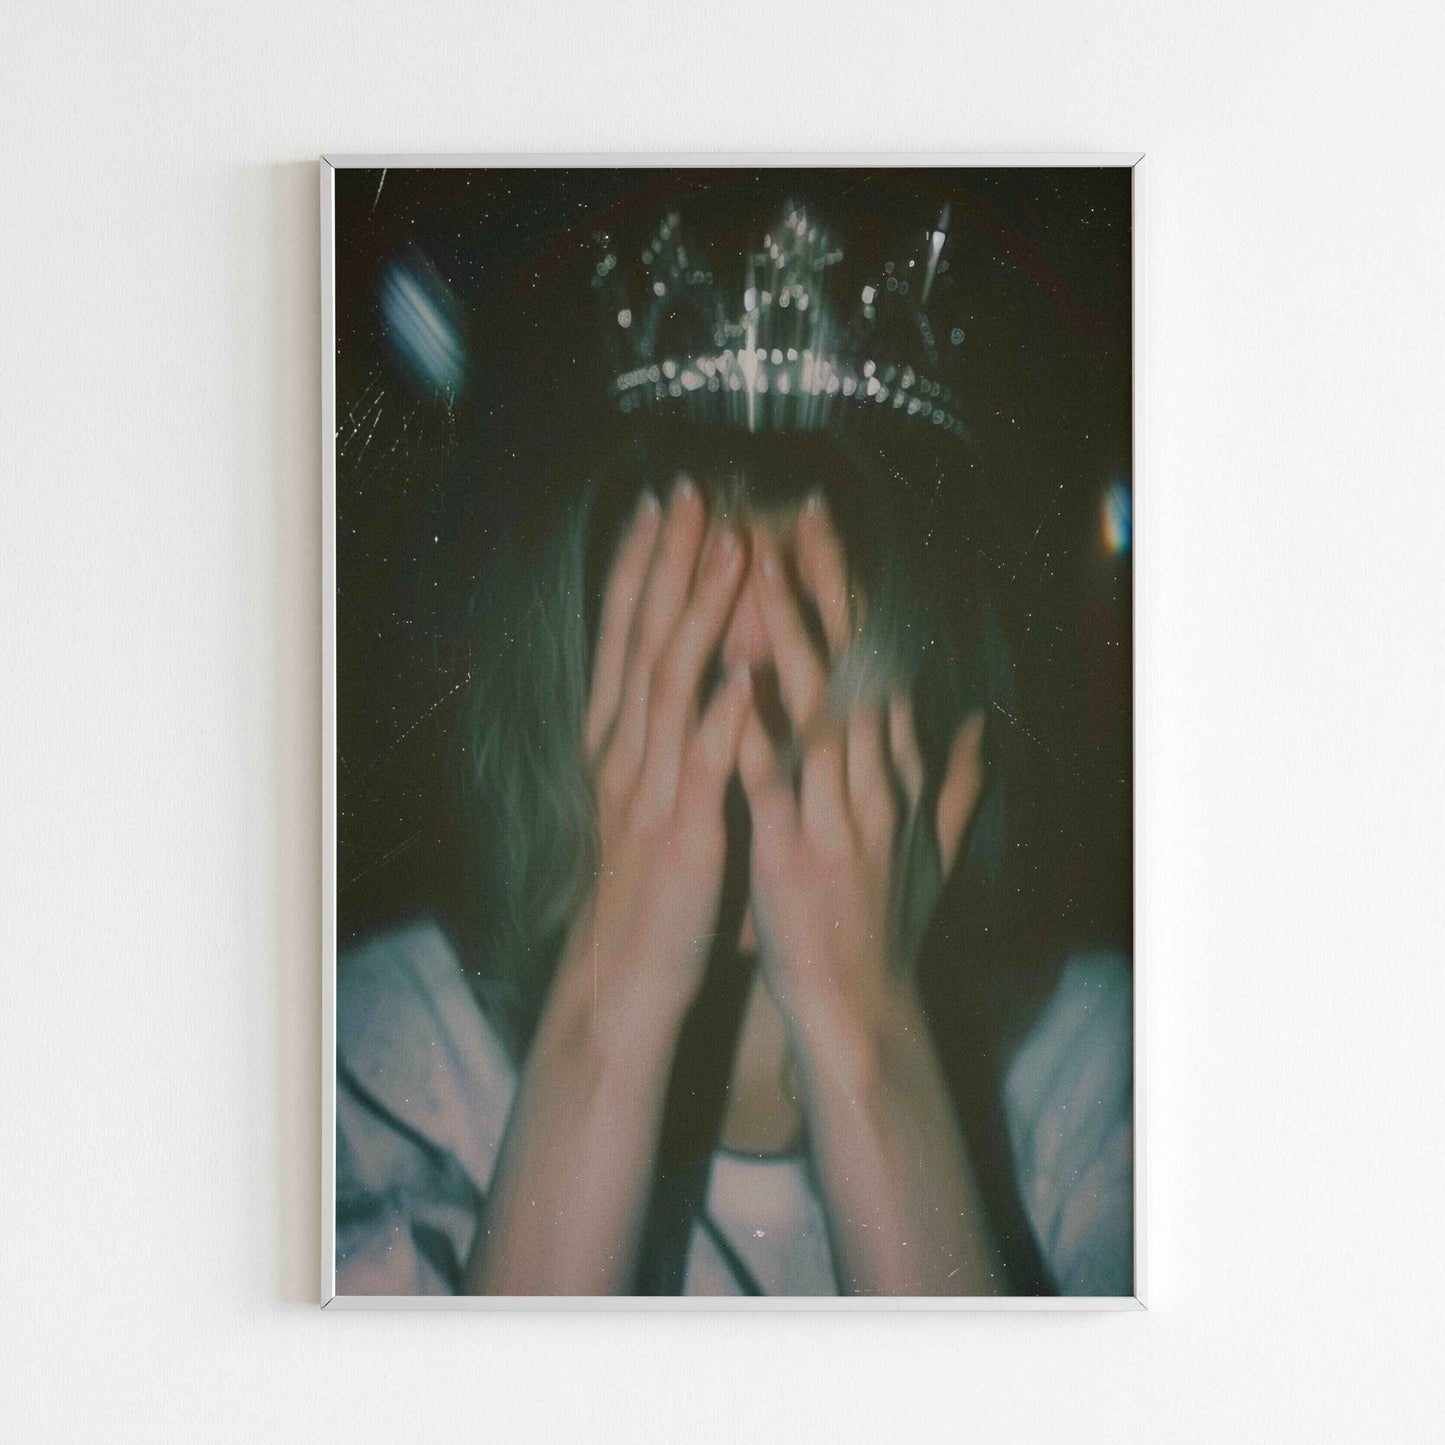 Embrace the mystery and intrigue of a blurred queen with this printable poster (physical or digital).